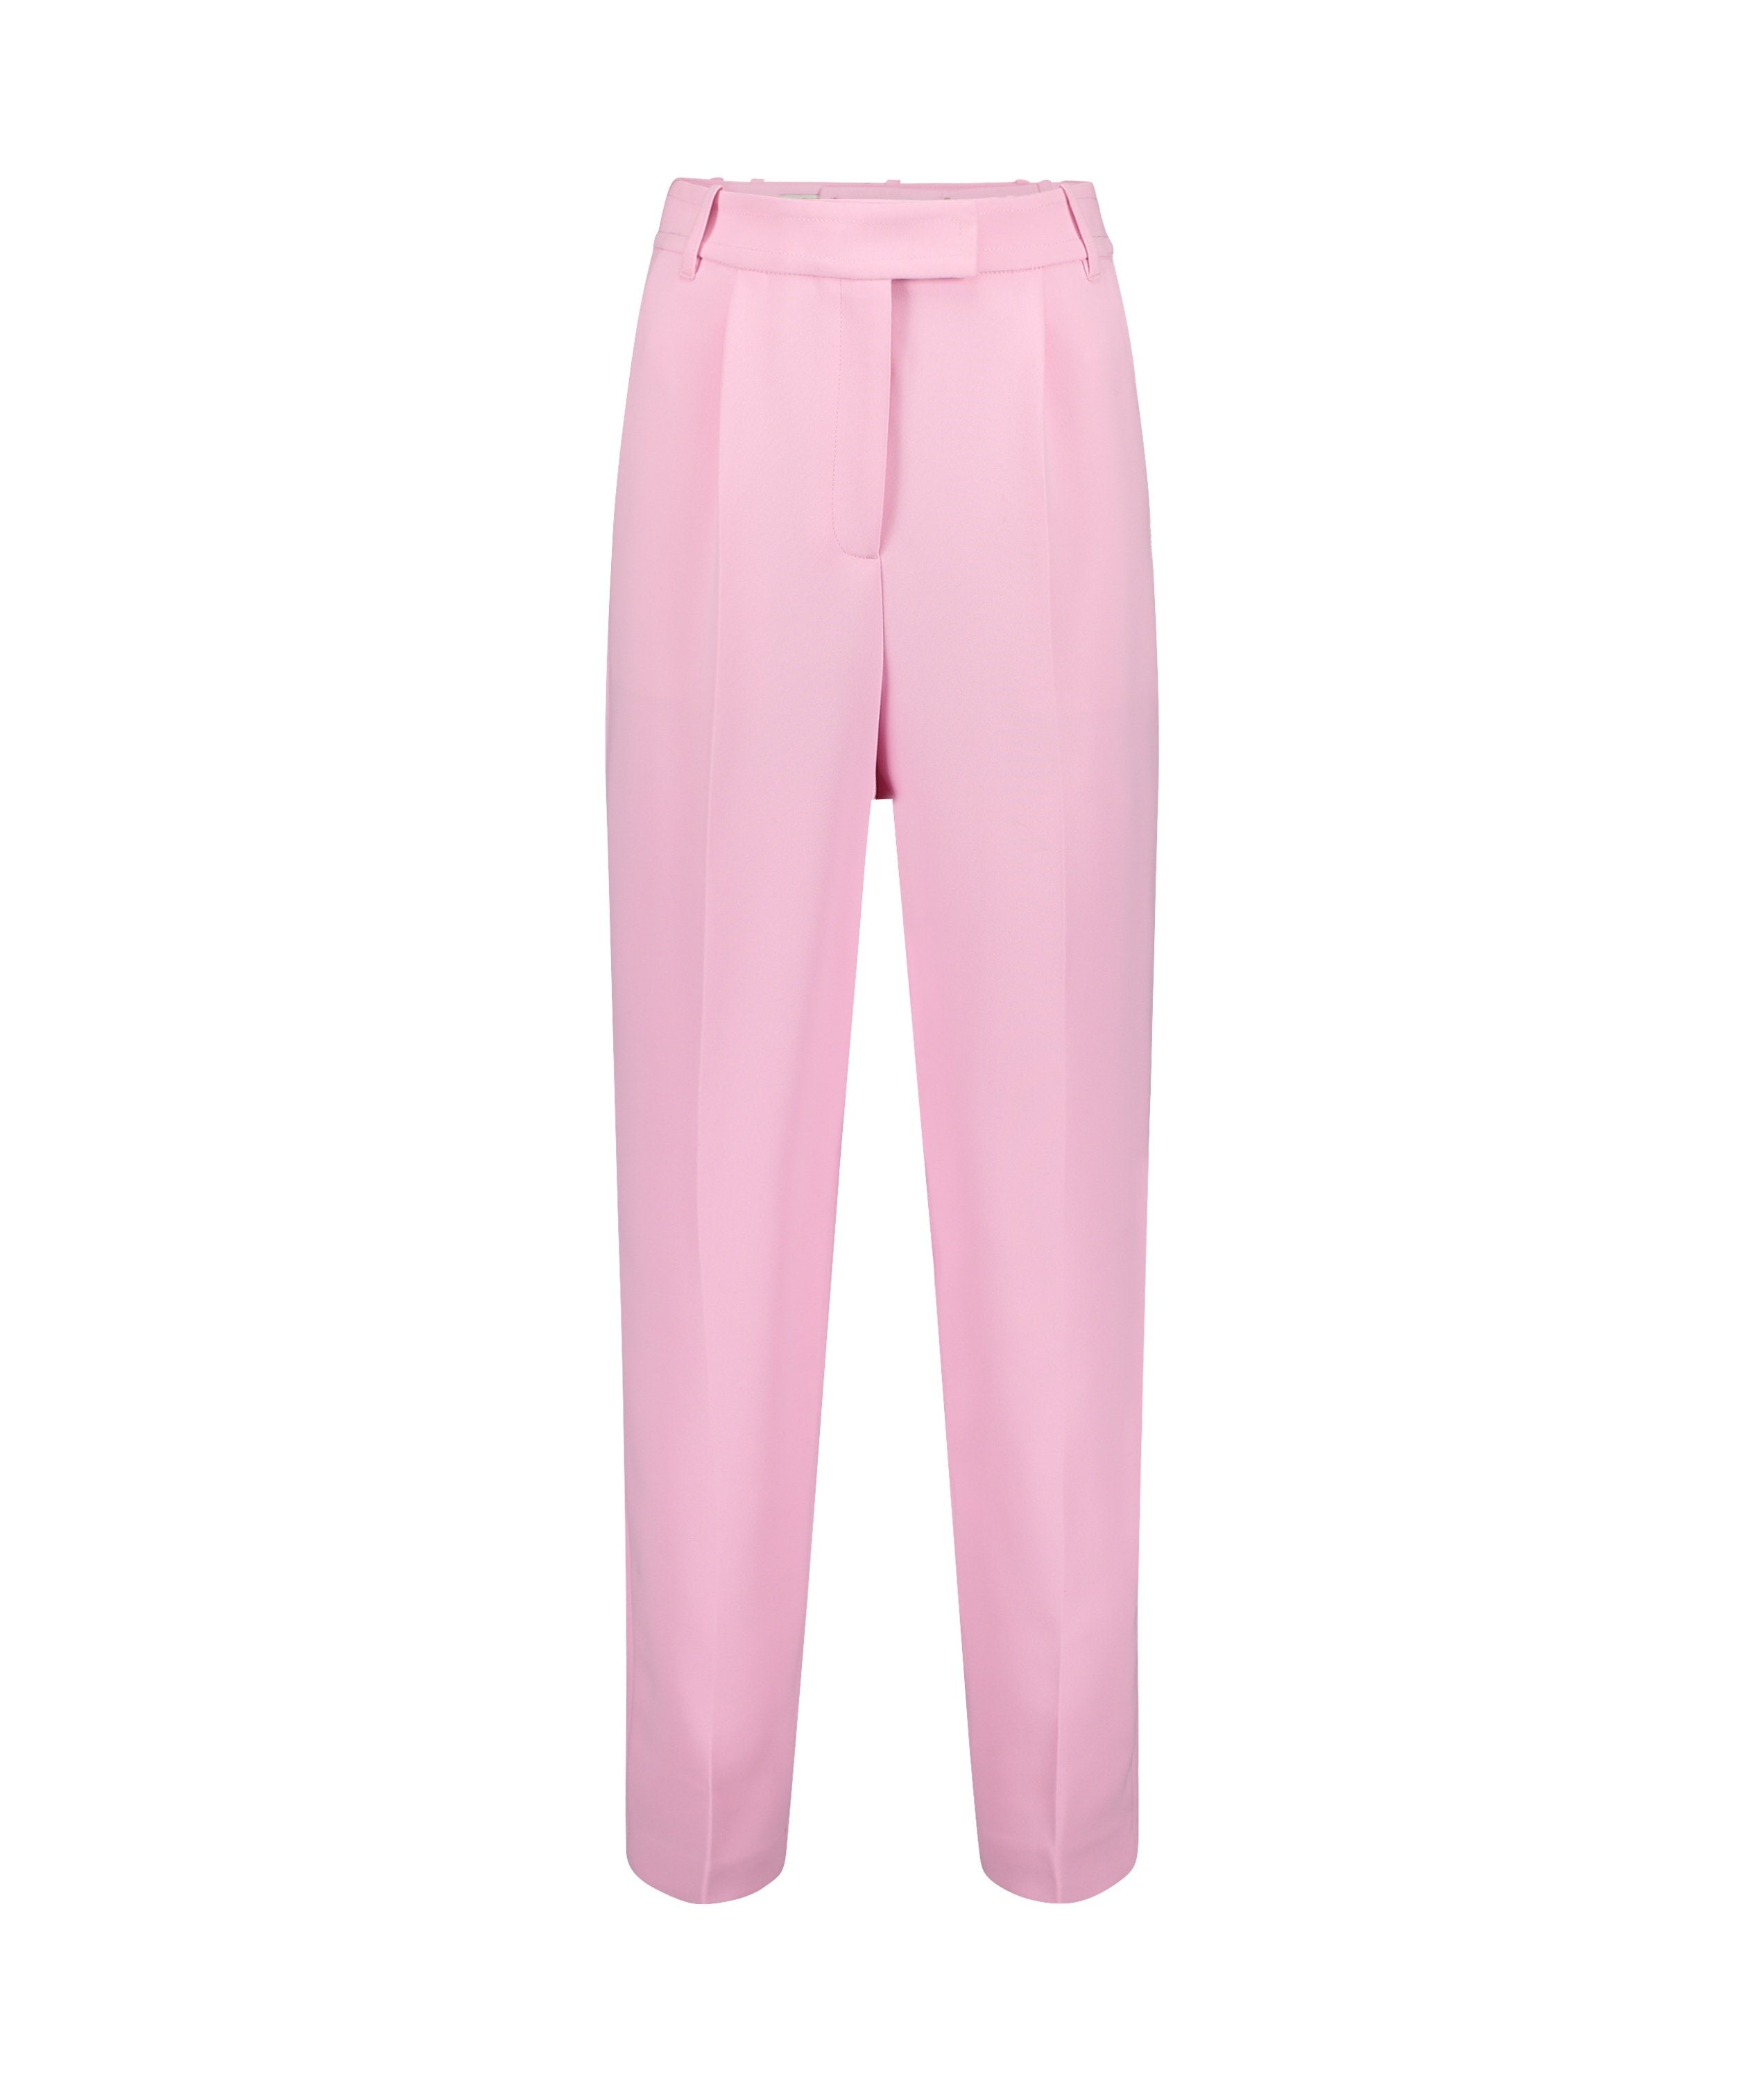 Myyiat Trousers - Lilac